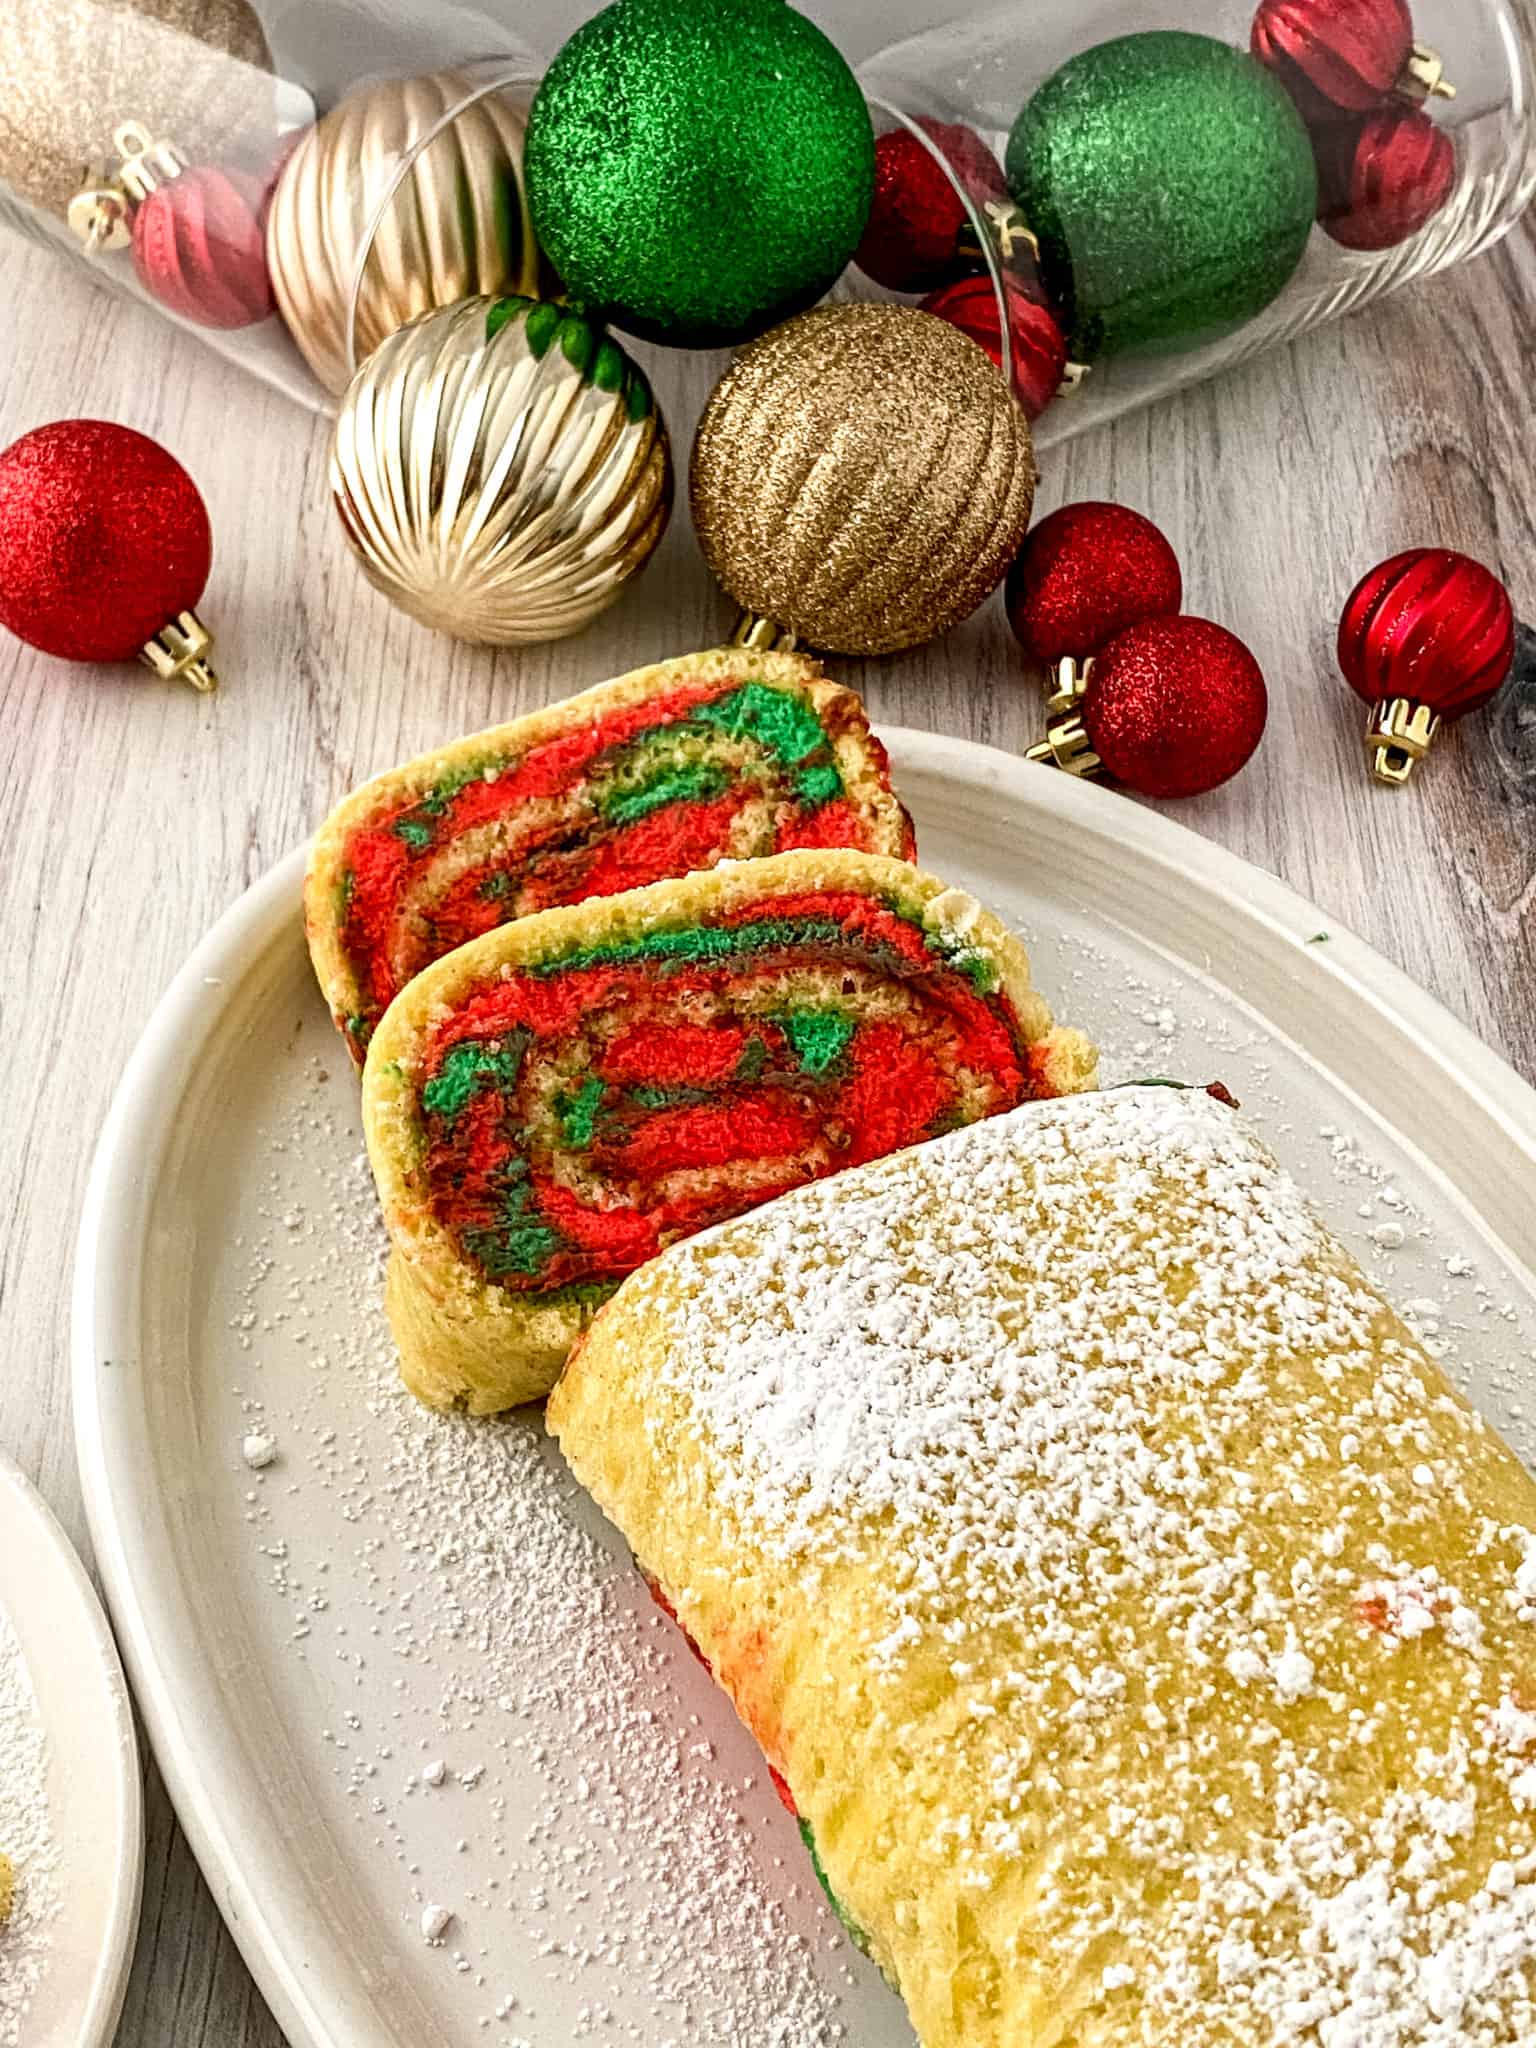 Bake a festive and delicious Christmas Yule log cake in just minutes with this easy recipe.